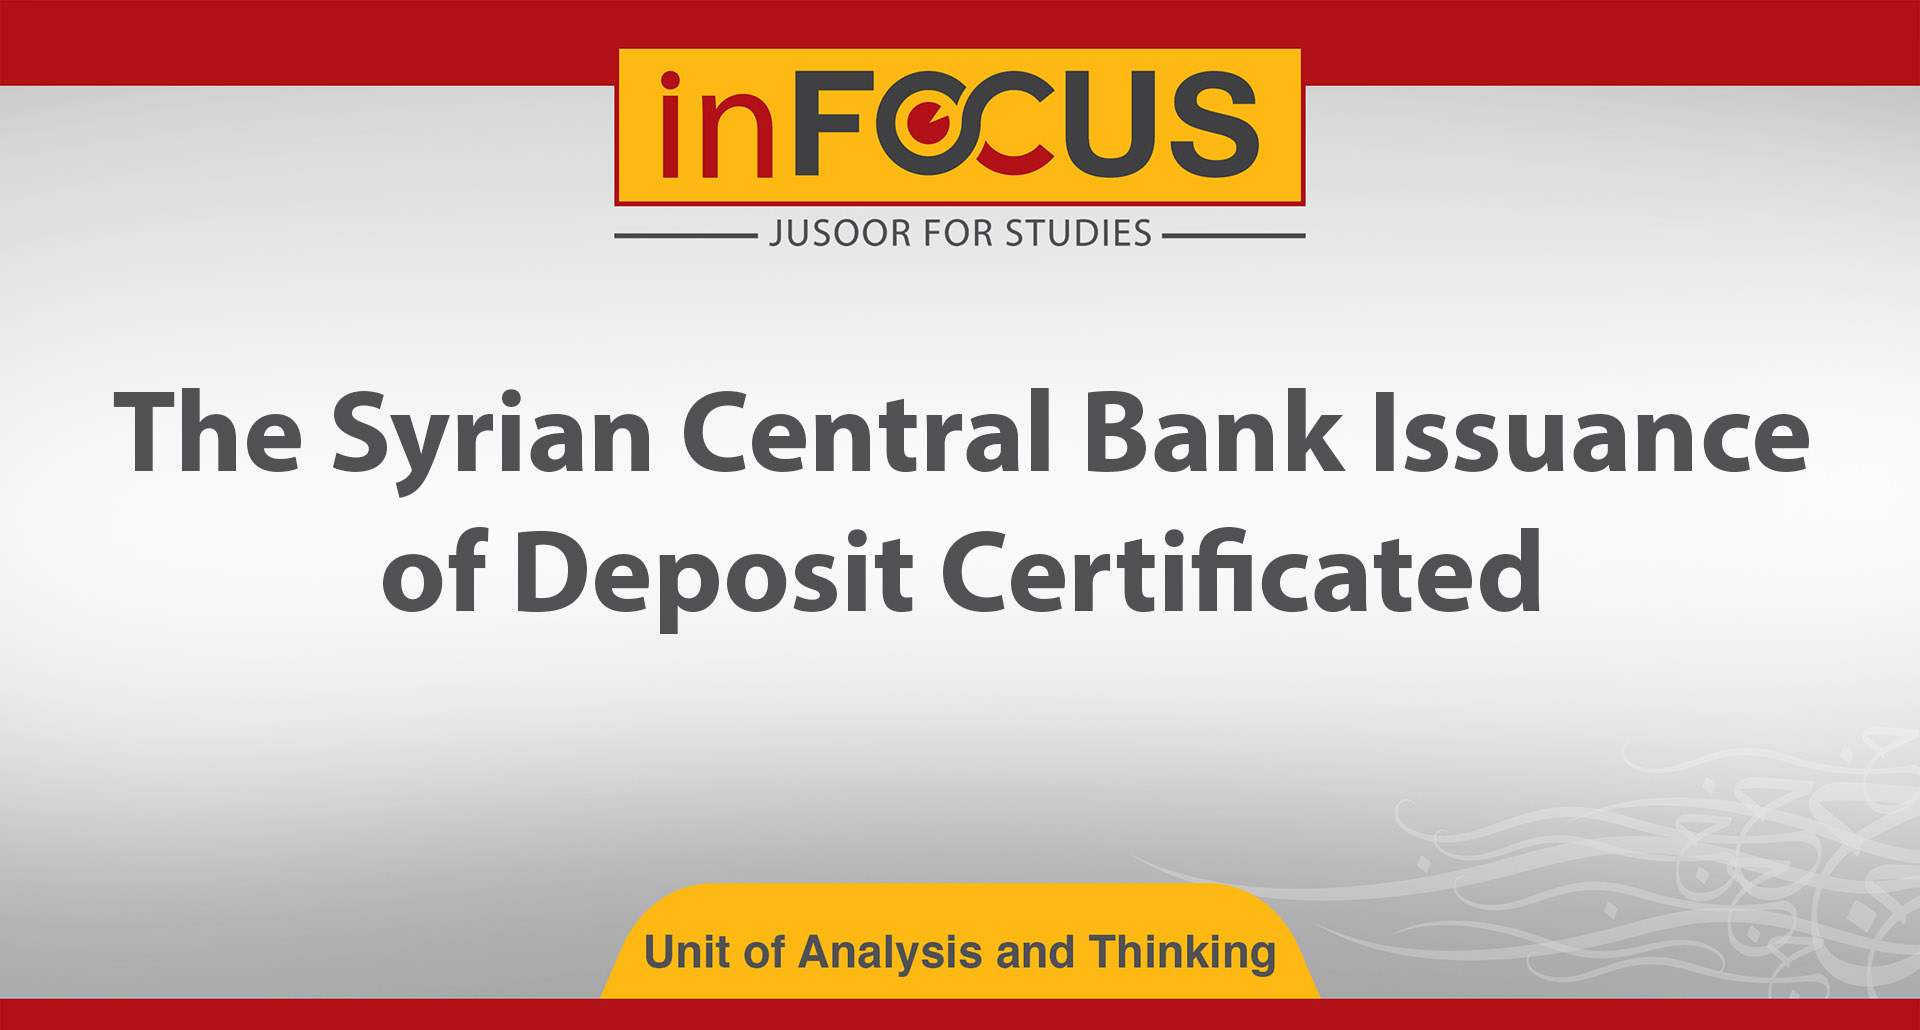 The Syrian Central Bank Issuance of Deposit Certificated